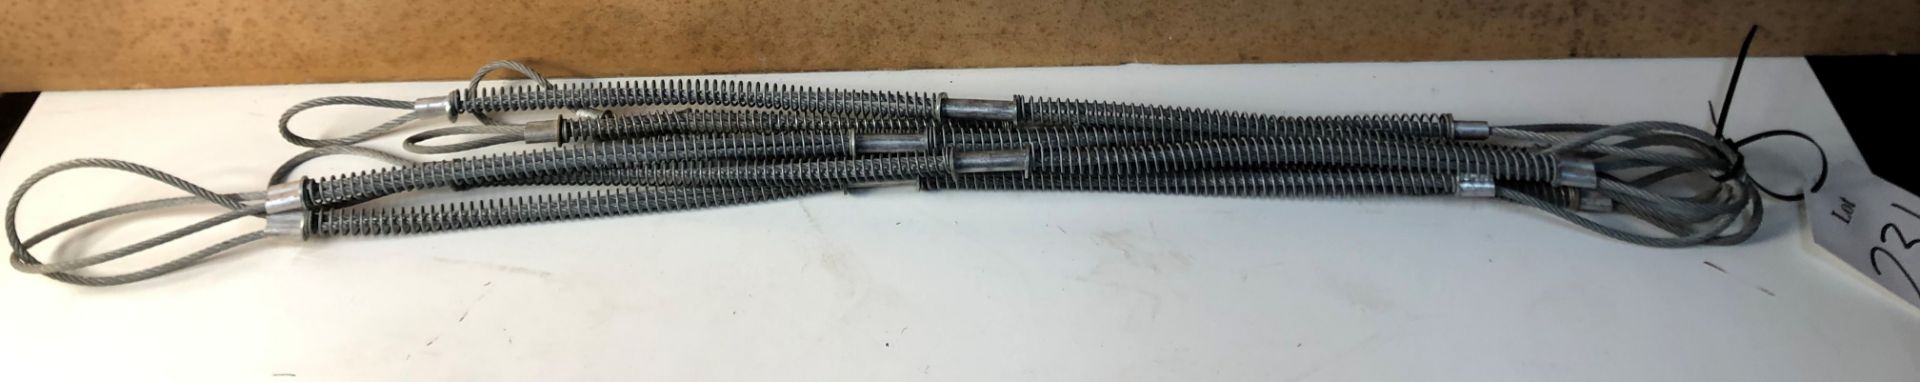 6 x Metal Spring Cables - Image 2 of 2